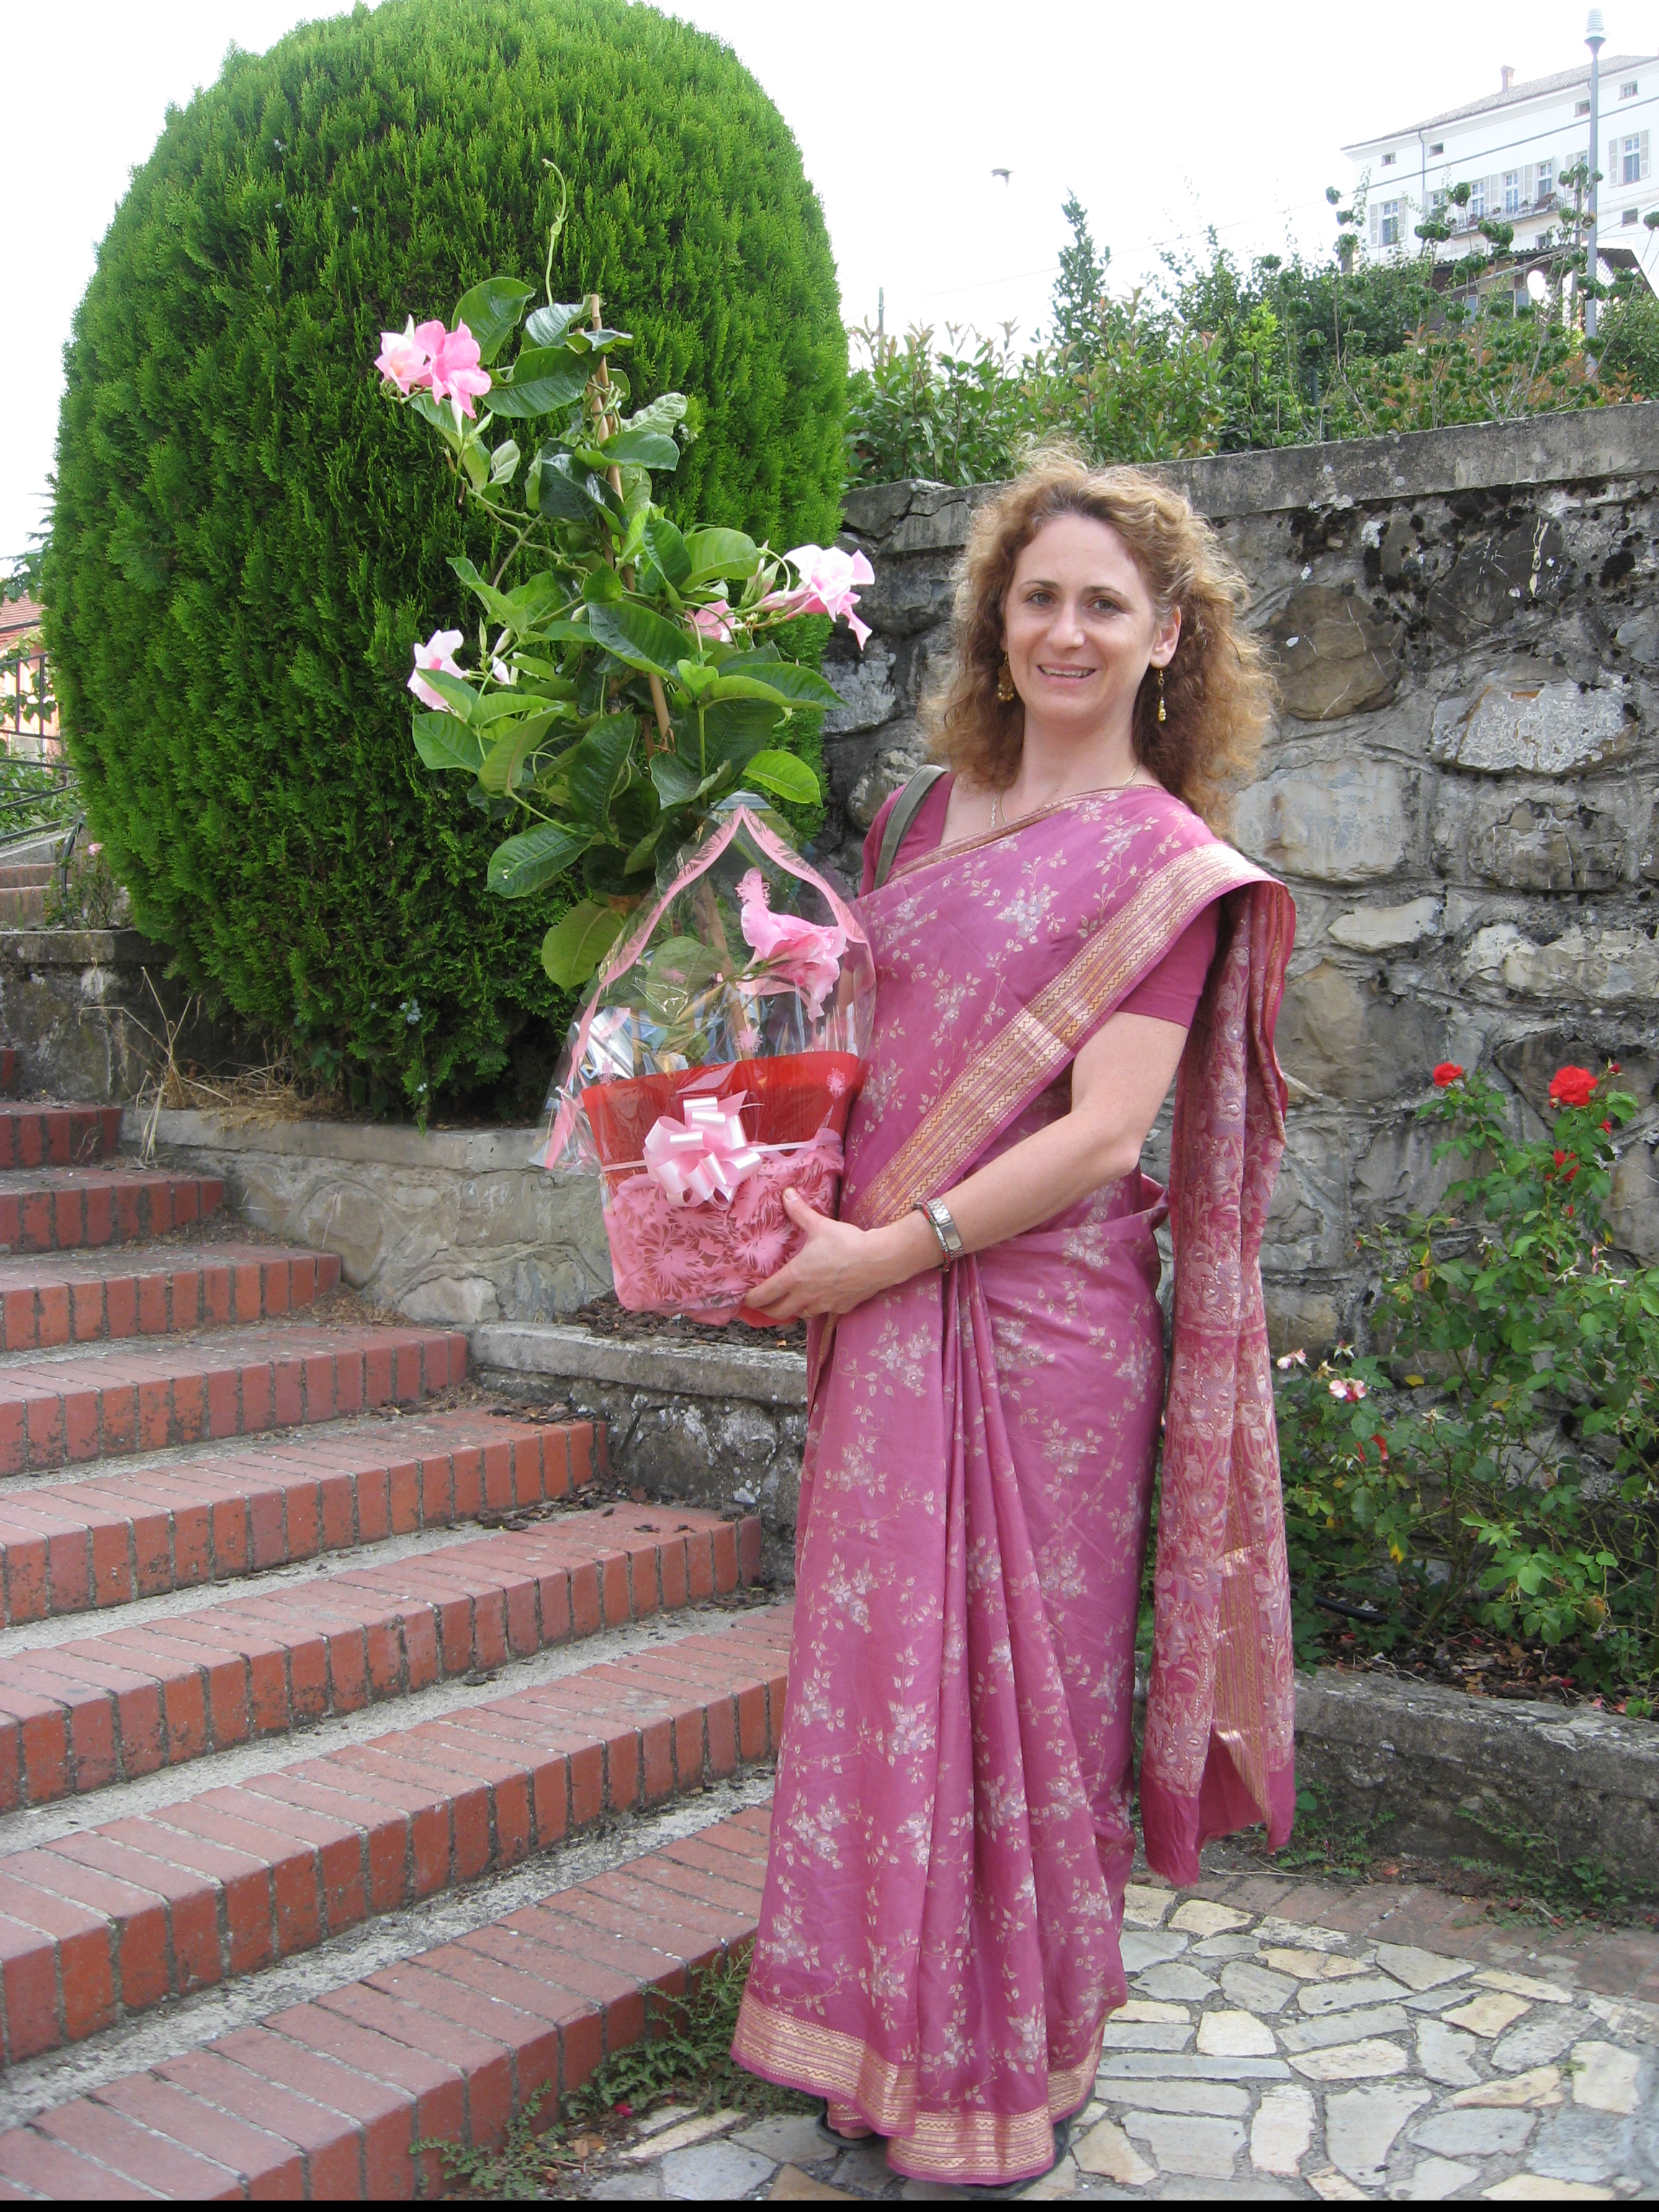 Ioana - at Cabella- Visiting the Castle with flowers from Halton to Shri Mataji in summer 2009